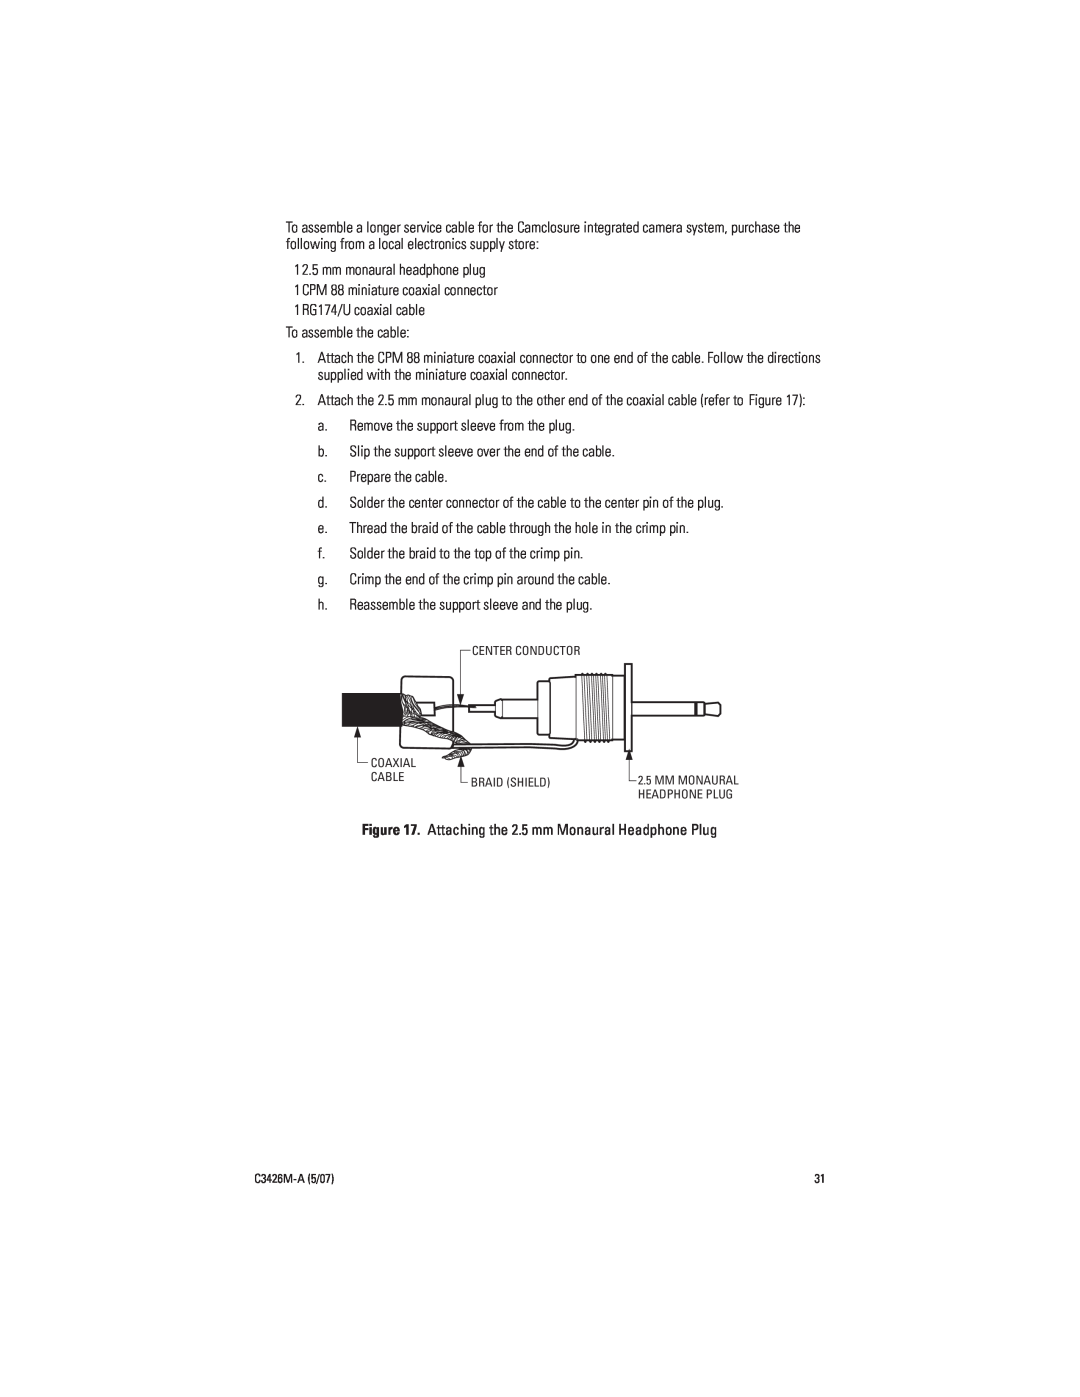 Pelco C3426M-A (5/07) manual To assemble the cable 